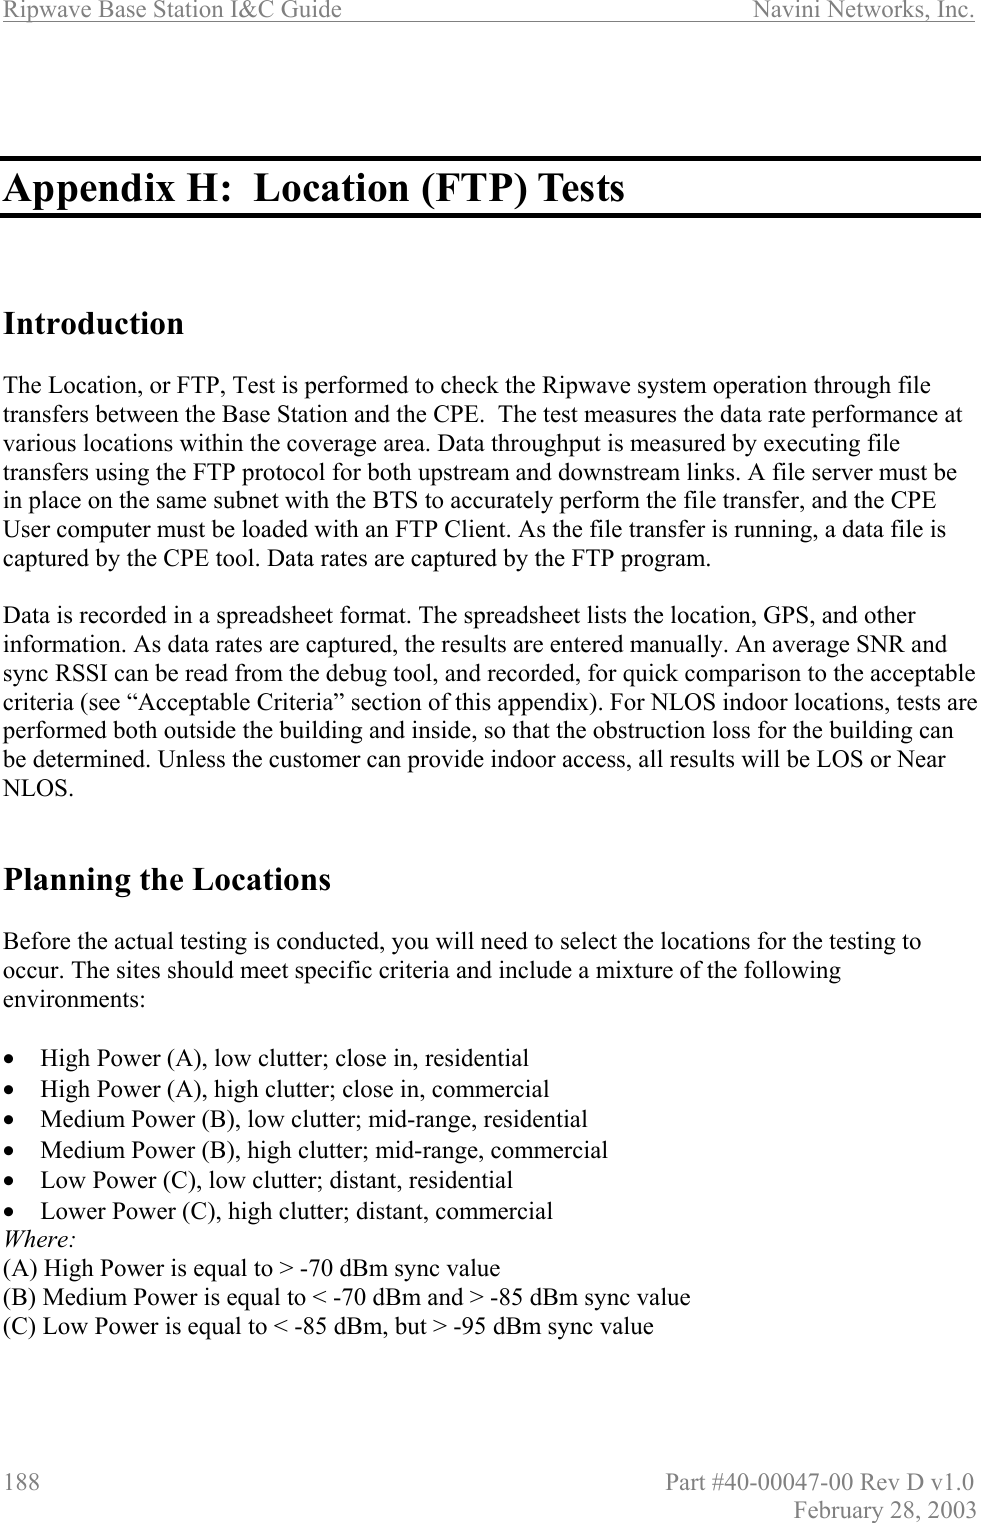 Ripwave Base Station I&amp;C Guide                      Navini Networks, Inc. 188                          Part #40-00047-00 Rev D v1.0 February 28, 2003    Appendix H:  Location (FTP) Tests    Introduction  The Location, or FTP, Test is performed to check the Ripwave system operation through file transfers between the Base Station and the CPE.  The test measures the data rate performance at various locations within the coverage area. Data throughput is measured by executing file transfers using the FTP protocol for both upstream and downstream links. A file server must be in place on the same subnet with the BTS to accurately perform the file transfer, and the CPE User computer must be loaded with an FTP Client. As the file transfer is running, a data file is captured by the CPE tool. Data rates are captured by the FTP program.   Data is recorded in a spreadsheet format. The spreadsheet lists the location, GPS, and other information. As data rates are captured, the results are entered manually. An average SNR and sync RSSI can be read from the debug tool, and recorded, for quick comparison to the acceptable criteria (see “Acceptable Criteria” section of this appendix). For NLOS indoor locations, tests are performed both outside the building and inside, so that the obstruction loss for the building can be determined. Unless the customer can provide indoor access, all results will be LOS or Near NLOS.    Planning the Locations  Before the actual testing is conducted, you will need to select the locations for the testing to occur. The sites should meet specific criteria and include a mixture of the following environments:  •  High Power (A), low clutter; close in, residential •  High Power (A), high clutter; close in, commercial •  Medium Power (B), low clutter; mid-range, residential •  Medium Power (B), high clutter; mid-range, commercial •  Low Power (C), low clutter; distant, residential •  Lower Power (C), high clutter; distant, commercial Where: (A) High Power is equal to &gt; -70 dBm sync value (B) Medium Power is equal to &lt; -70 dBm and &gt; -85 dBm sync value (C) Low Power is equal to &lt; -85 dBm, but &gt; -95 dBm sync value   